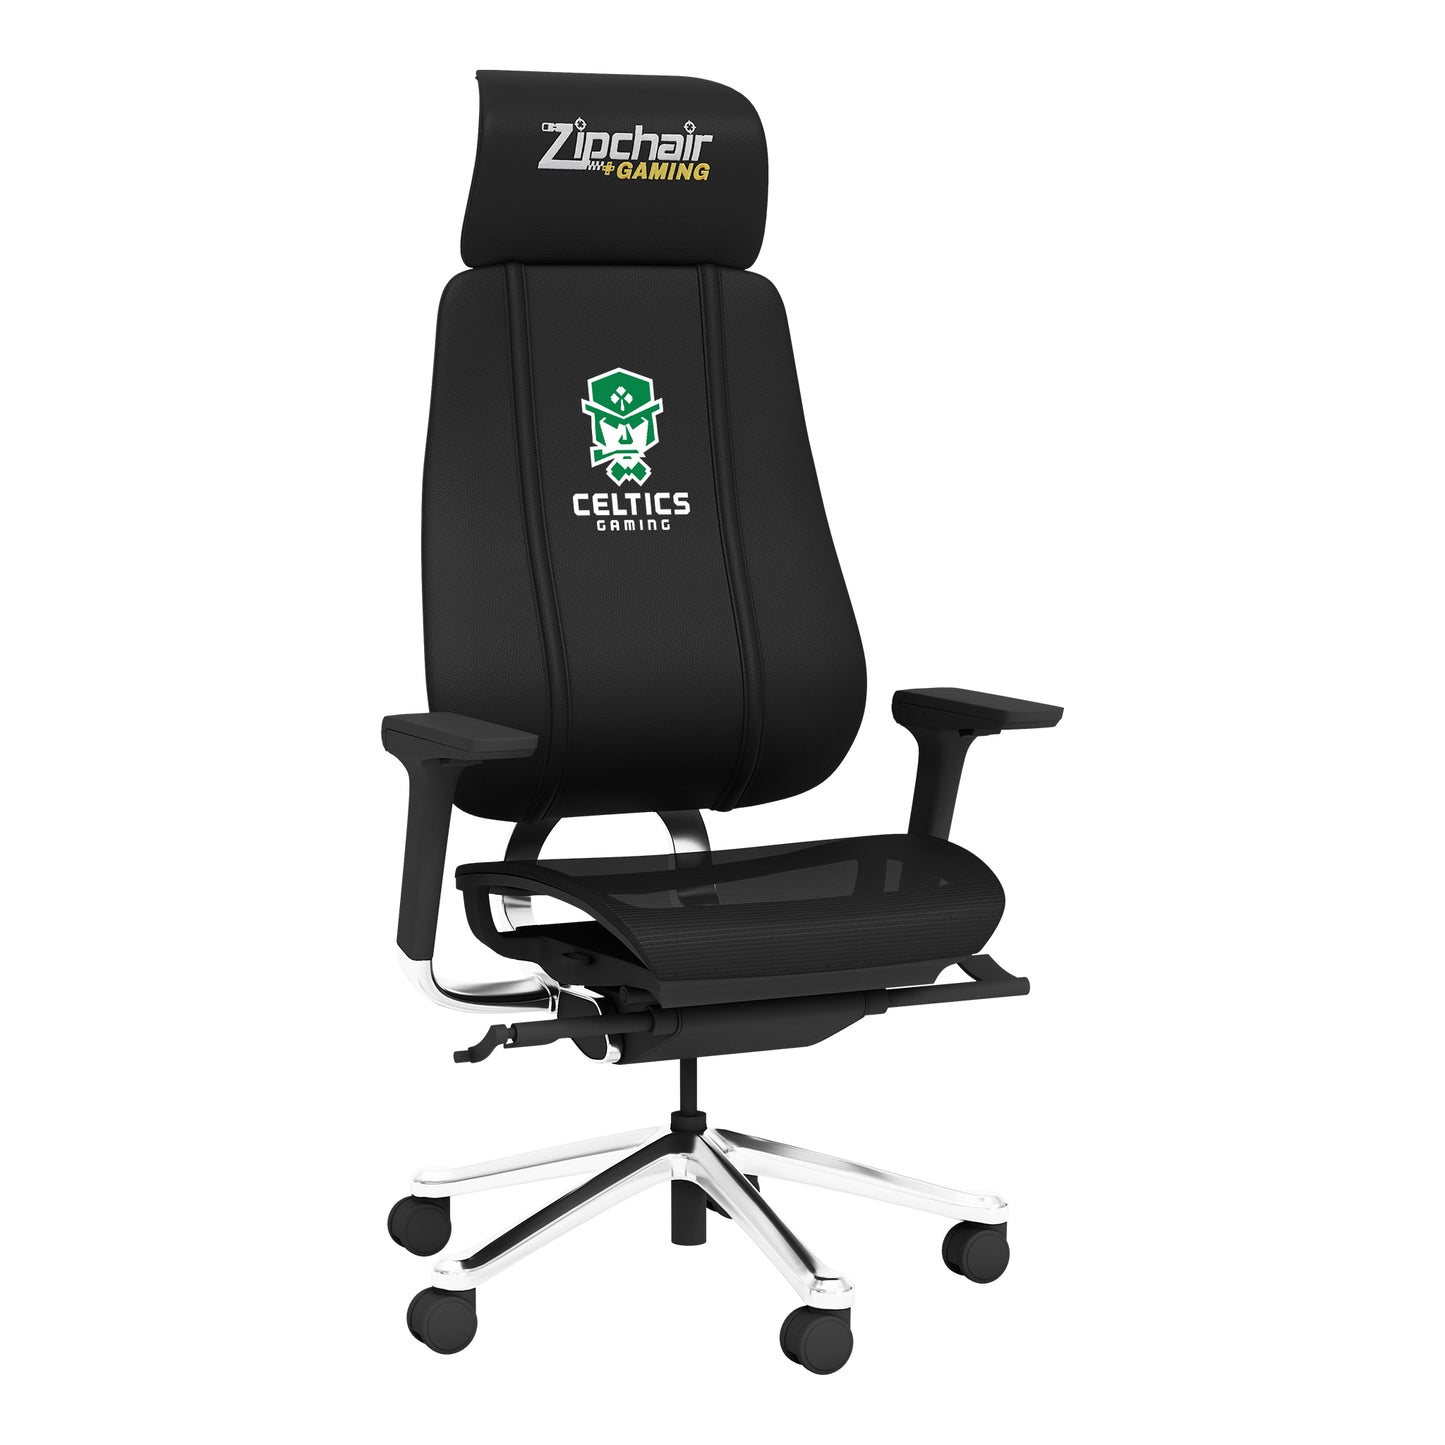 PhantomX Mesh Gaming Chair with Celtics Crossover Gaming Primary [CAN ONLY BE SHIPPED TO MASSACHUSETTS]